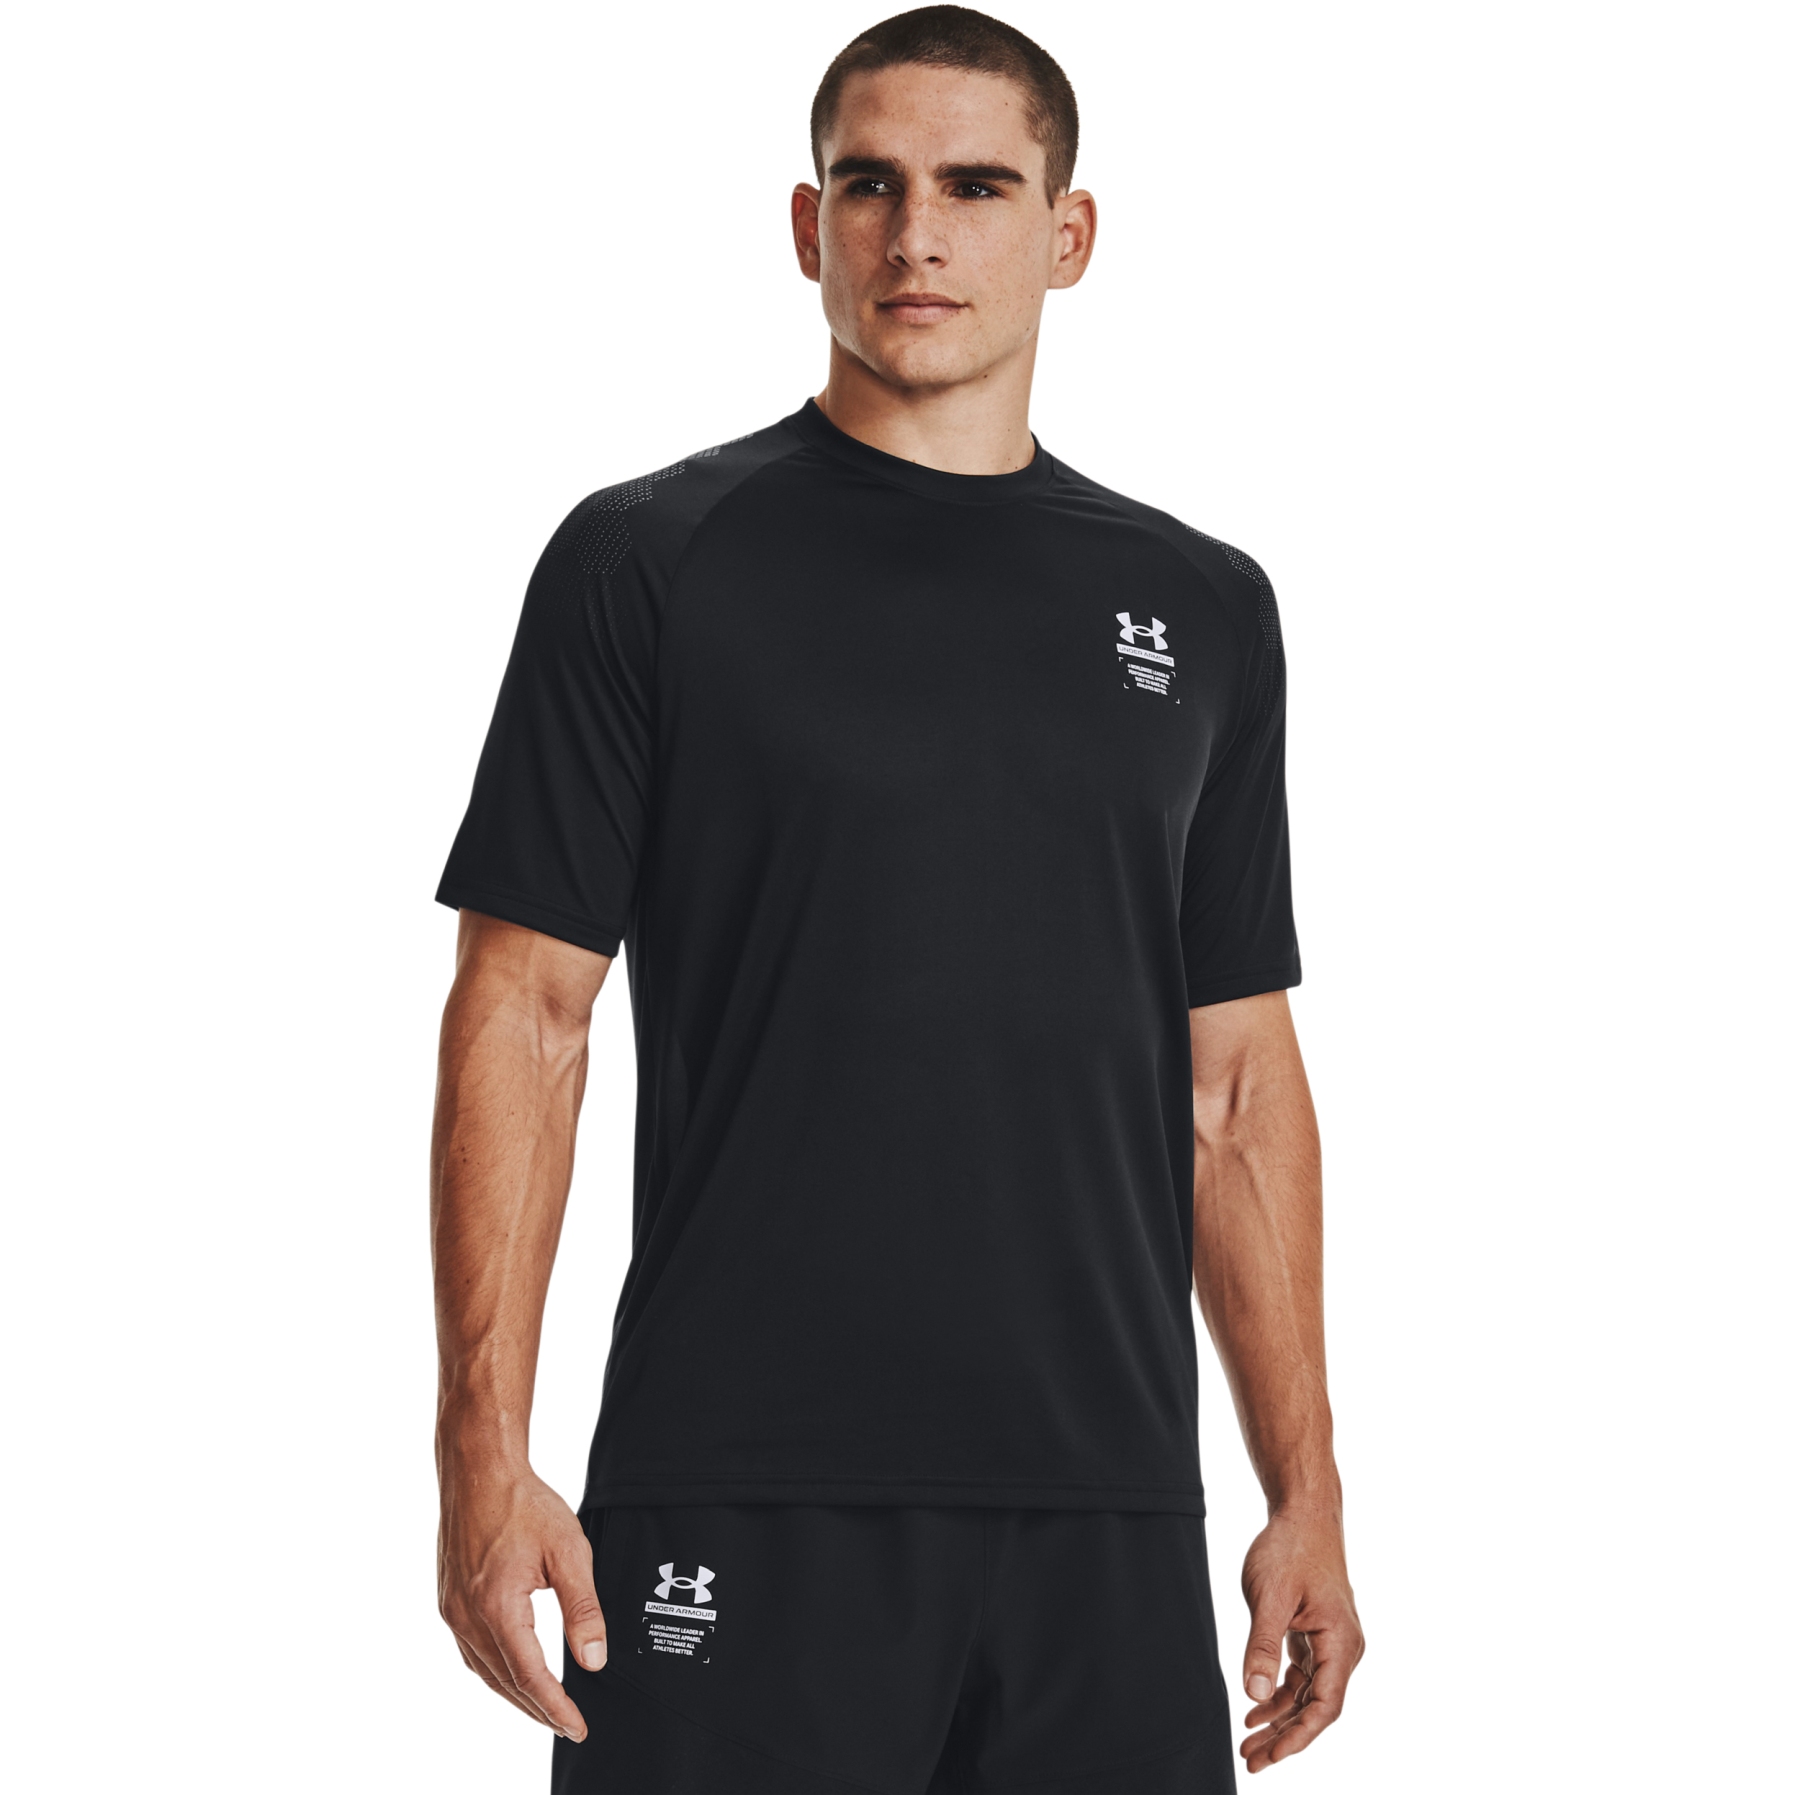 Picture of Under Armour UA ArmourPrint Short Sleeve Shirt Men - Black/Halo Gray